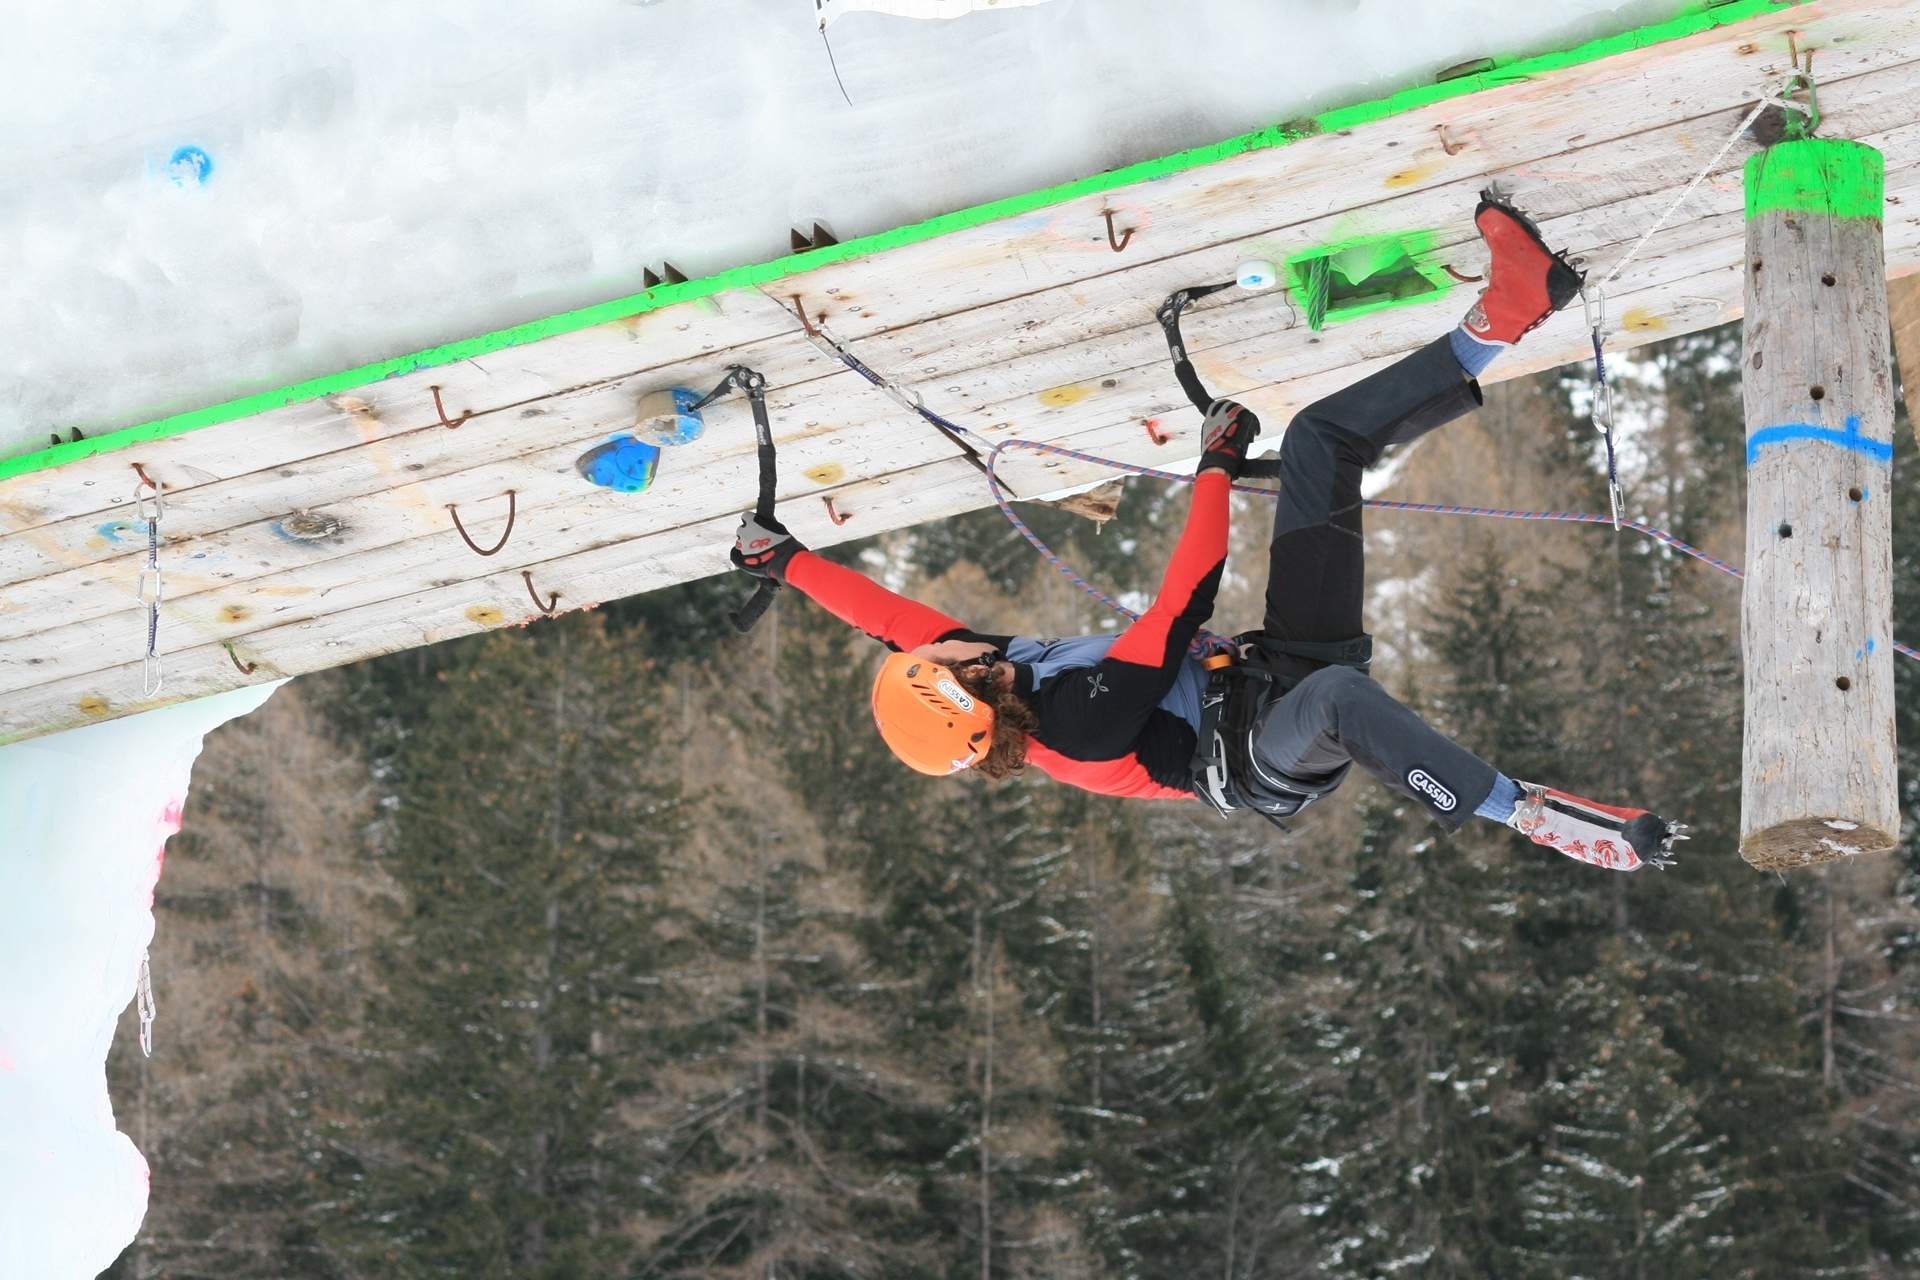 Ice Climbing: Training In South Tyrol, Courses For Amateurs And Beginners in Austria. 1920x1280 HD Background.